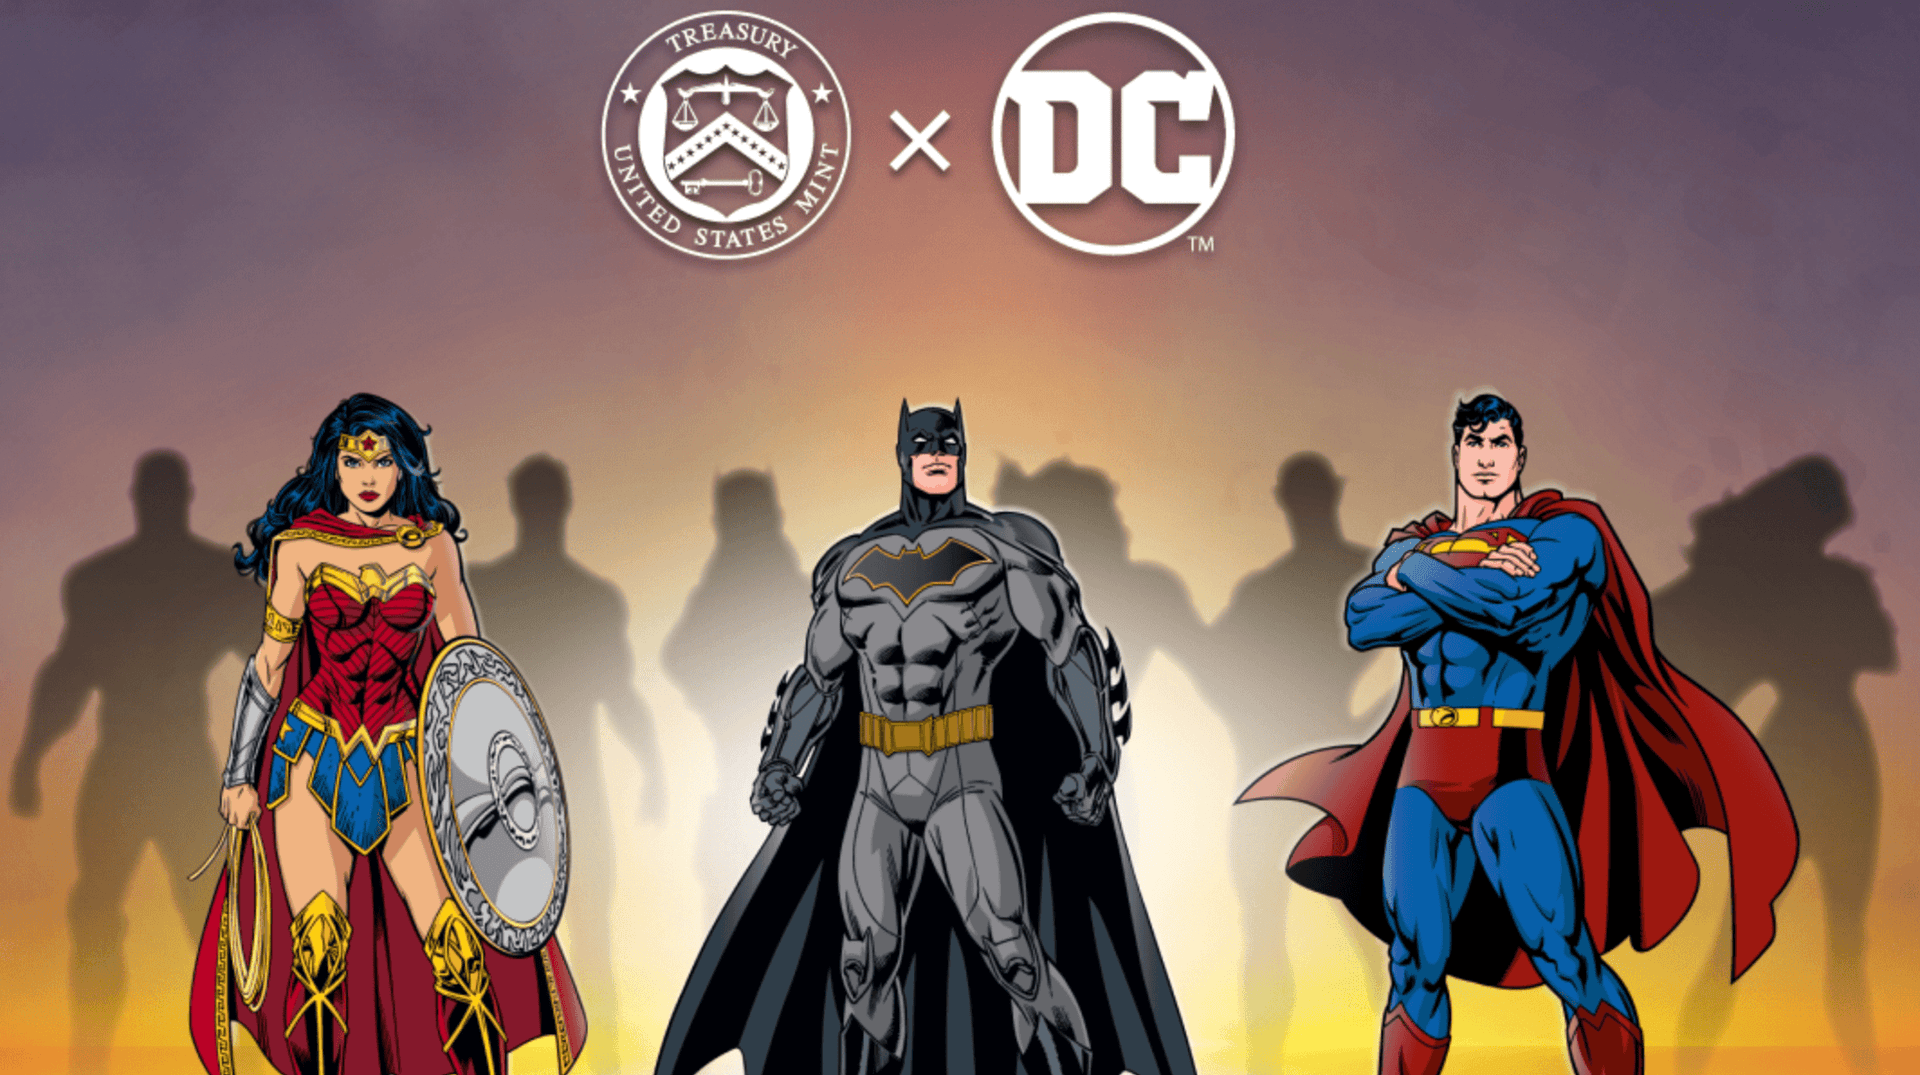 DC superheroes to appear on commemorative coins in 2025